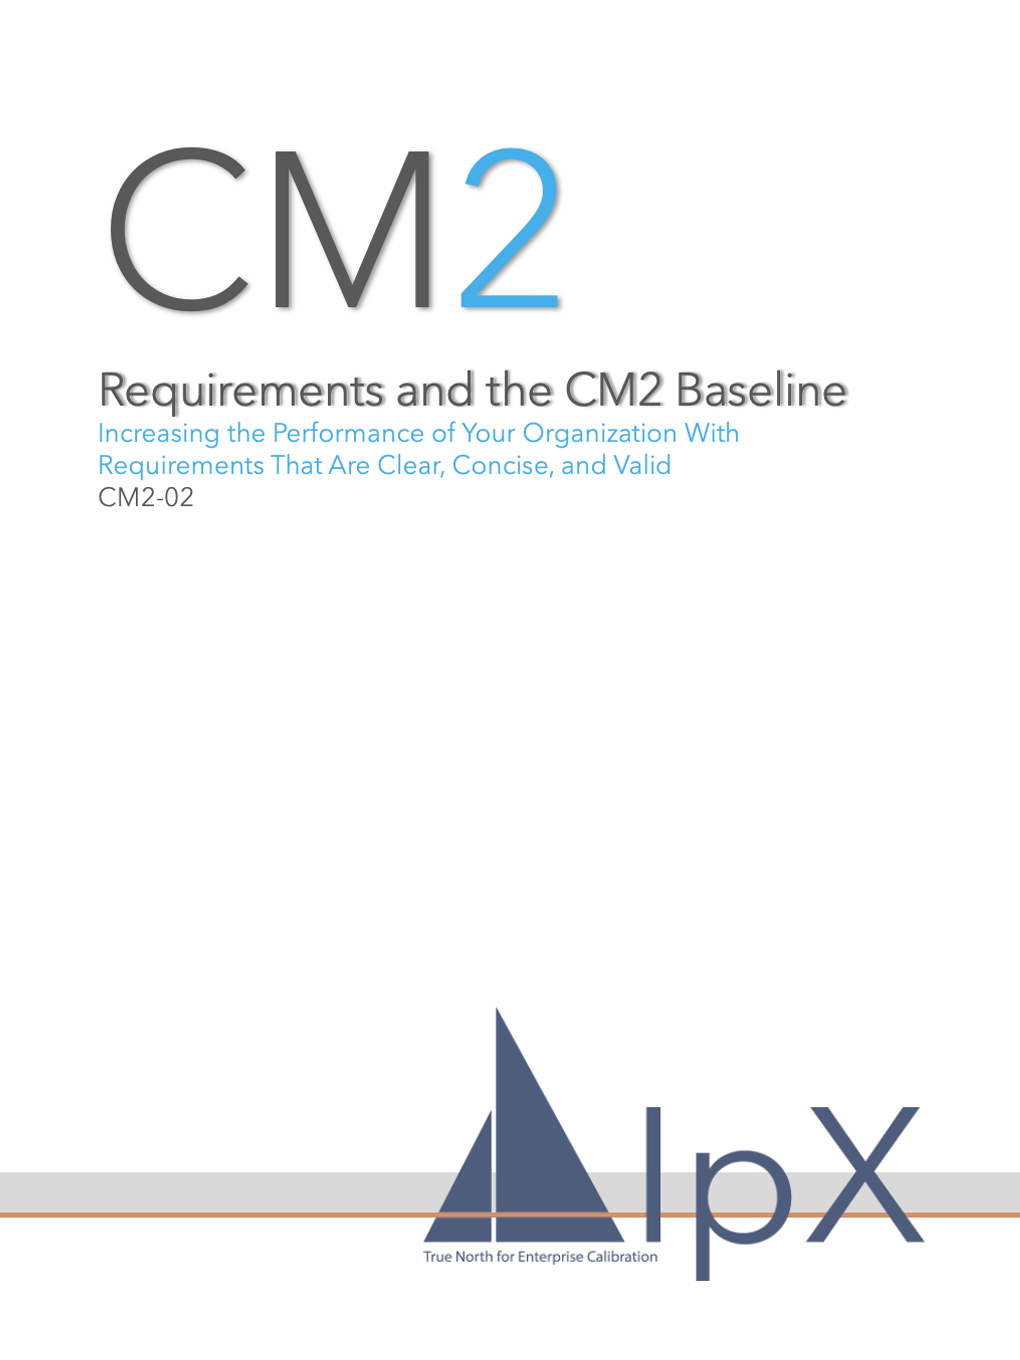 Requirements and the CM2 Baseline (CM2-02)